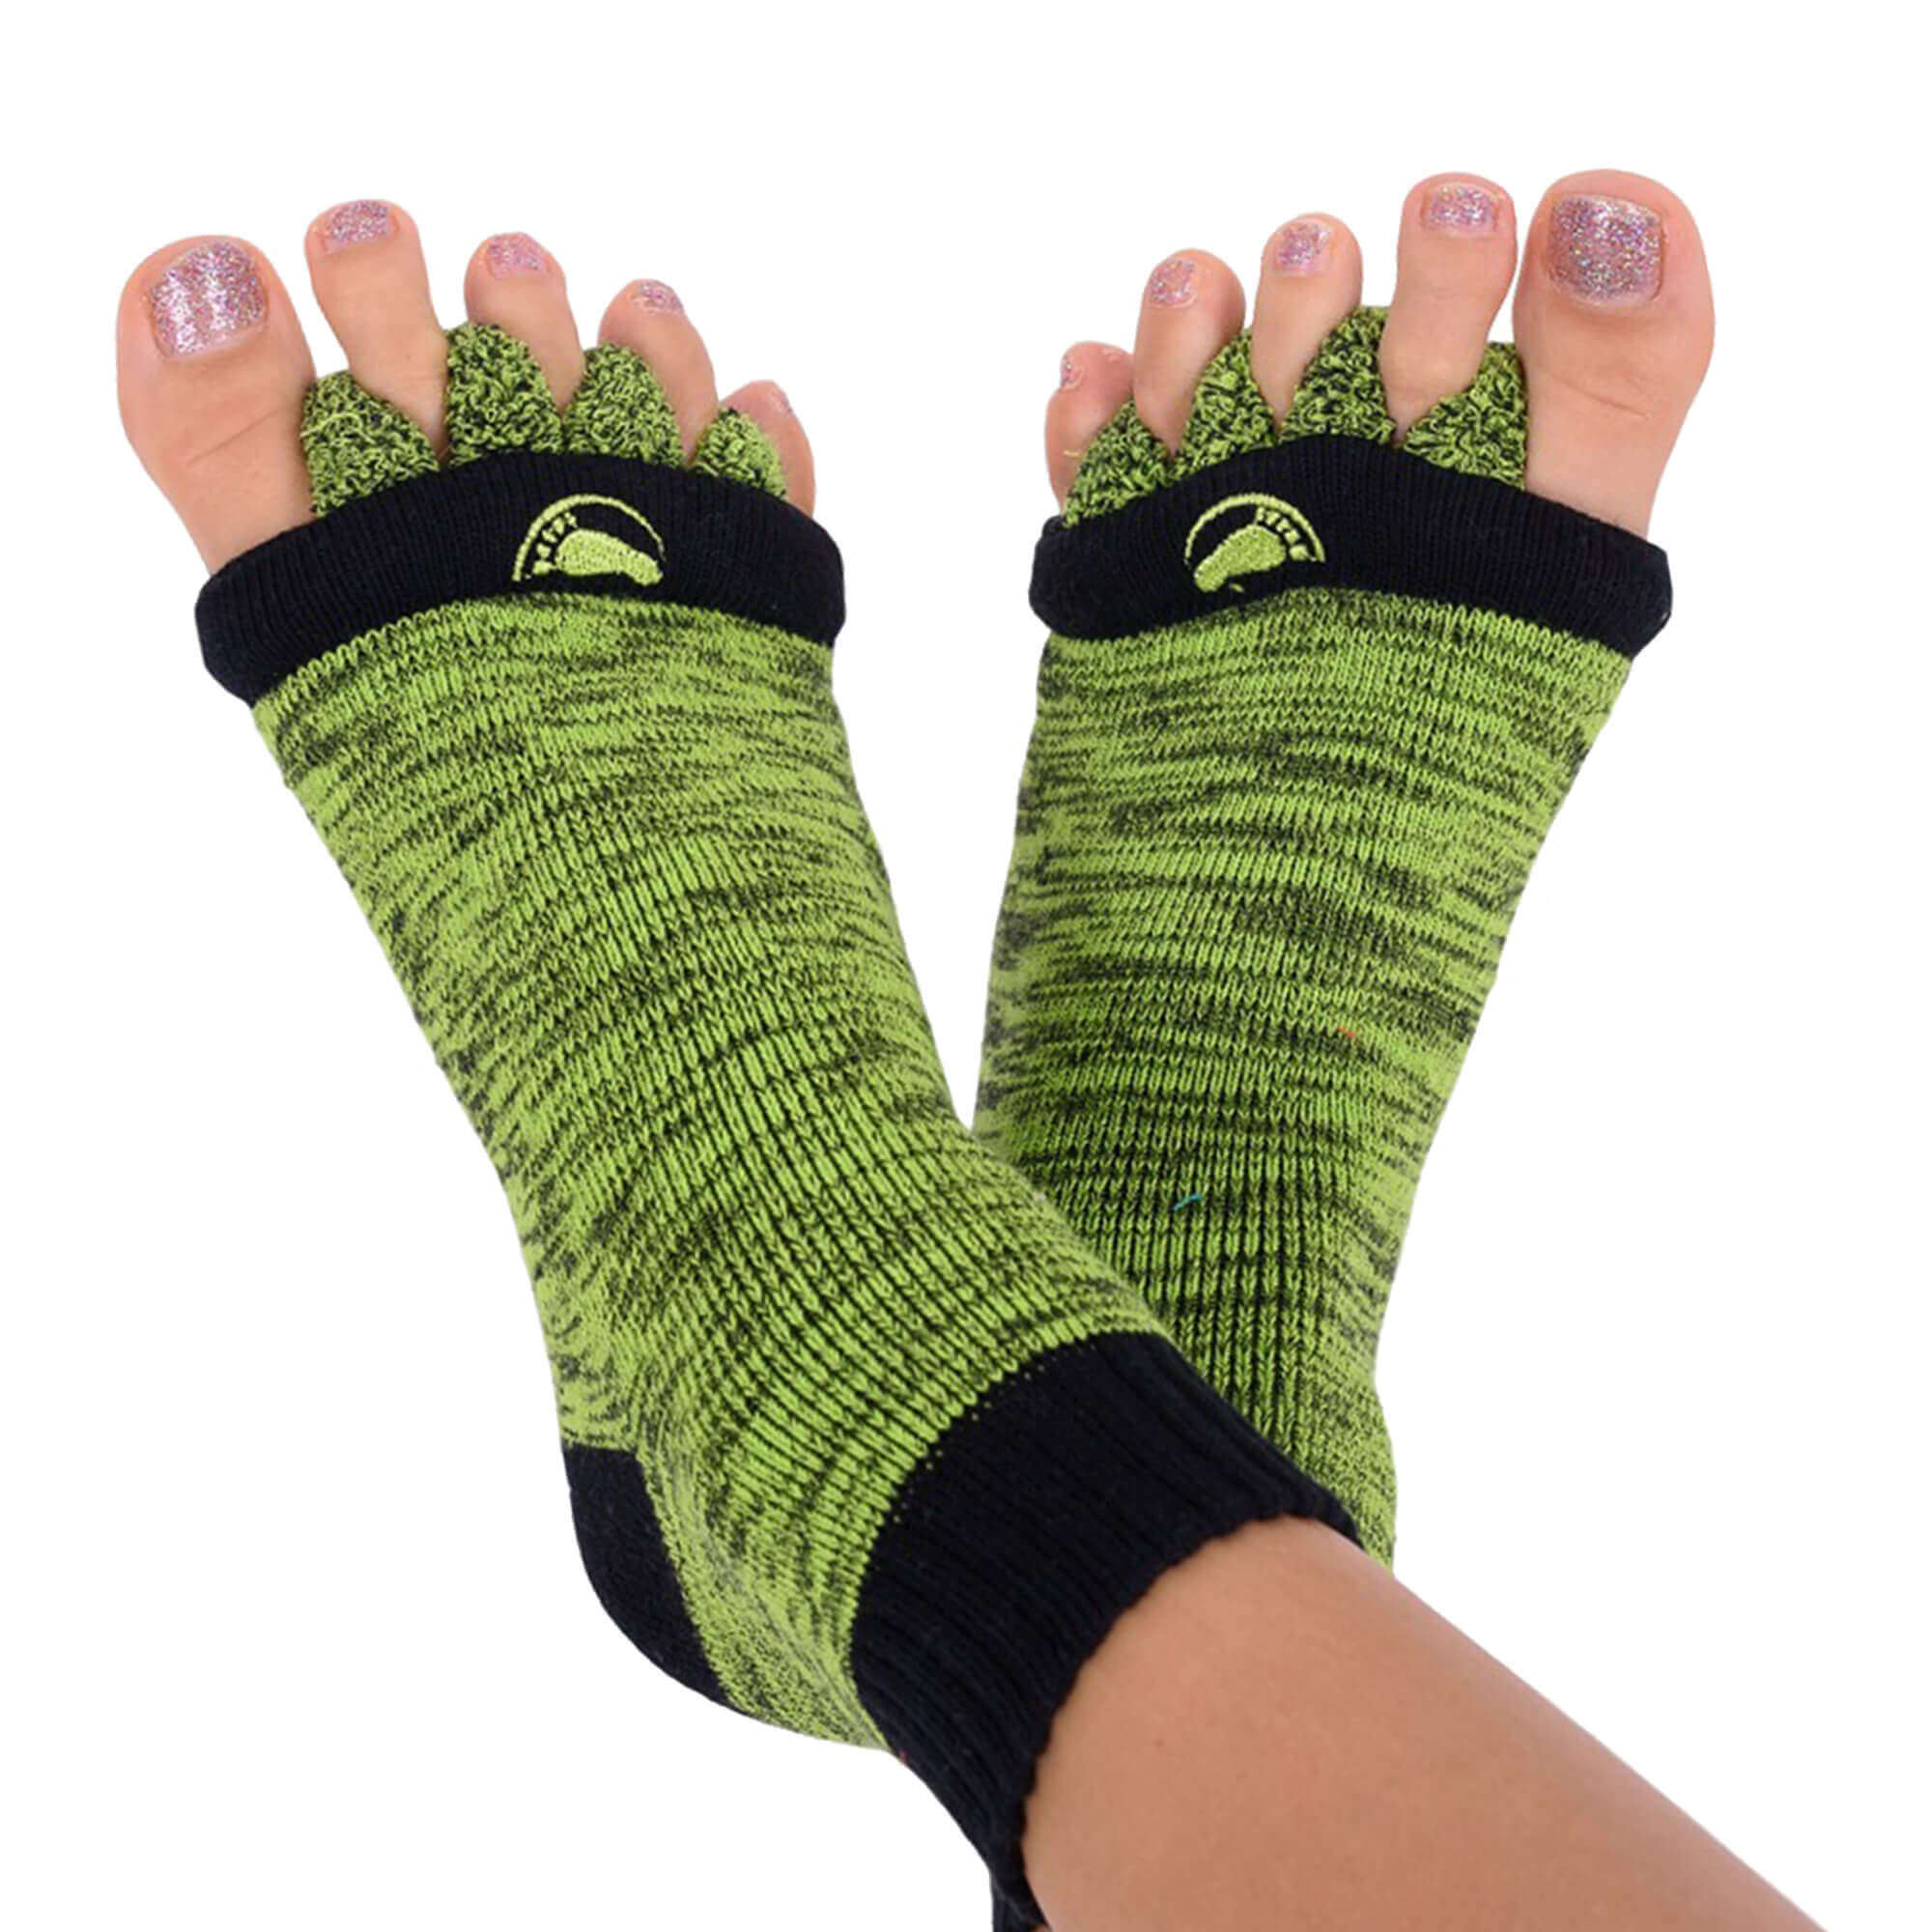 Sore feet and foot pain find relief with Green Foot Alignment Socks. –  My-Happy Feet - The Original Foot Alignment Socks